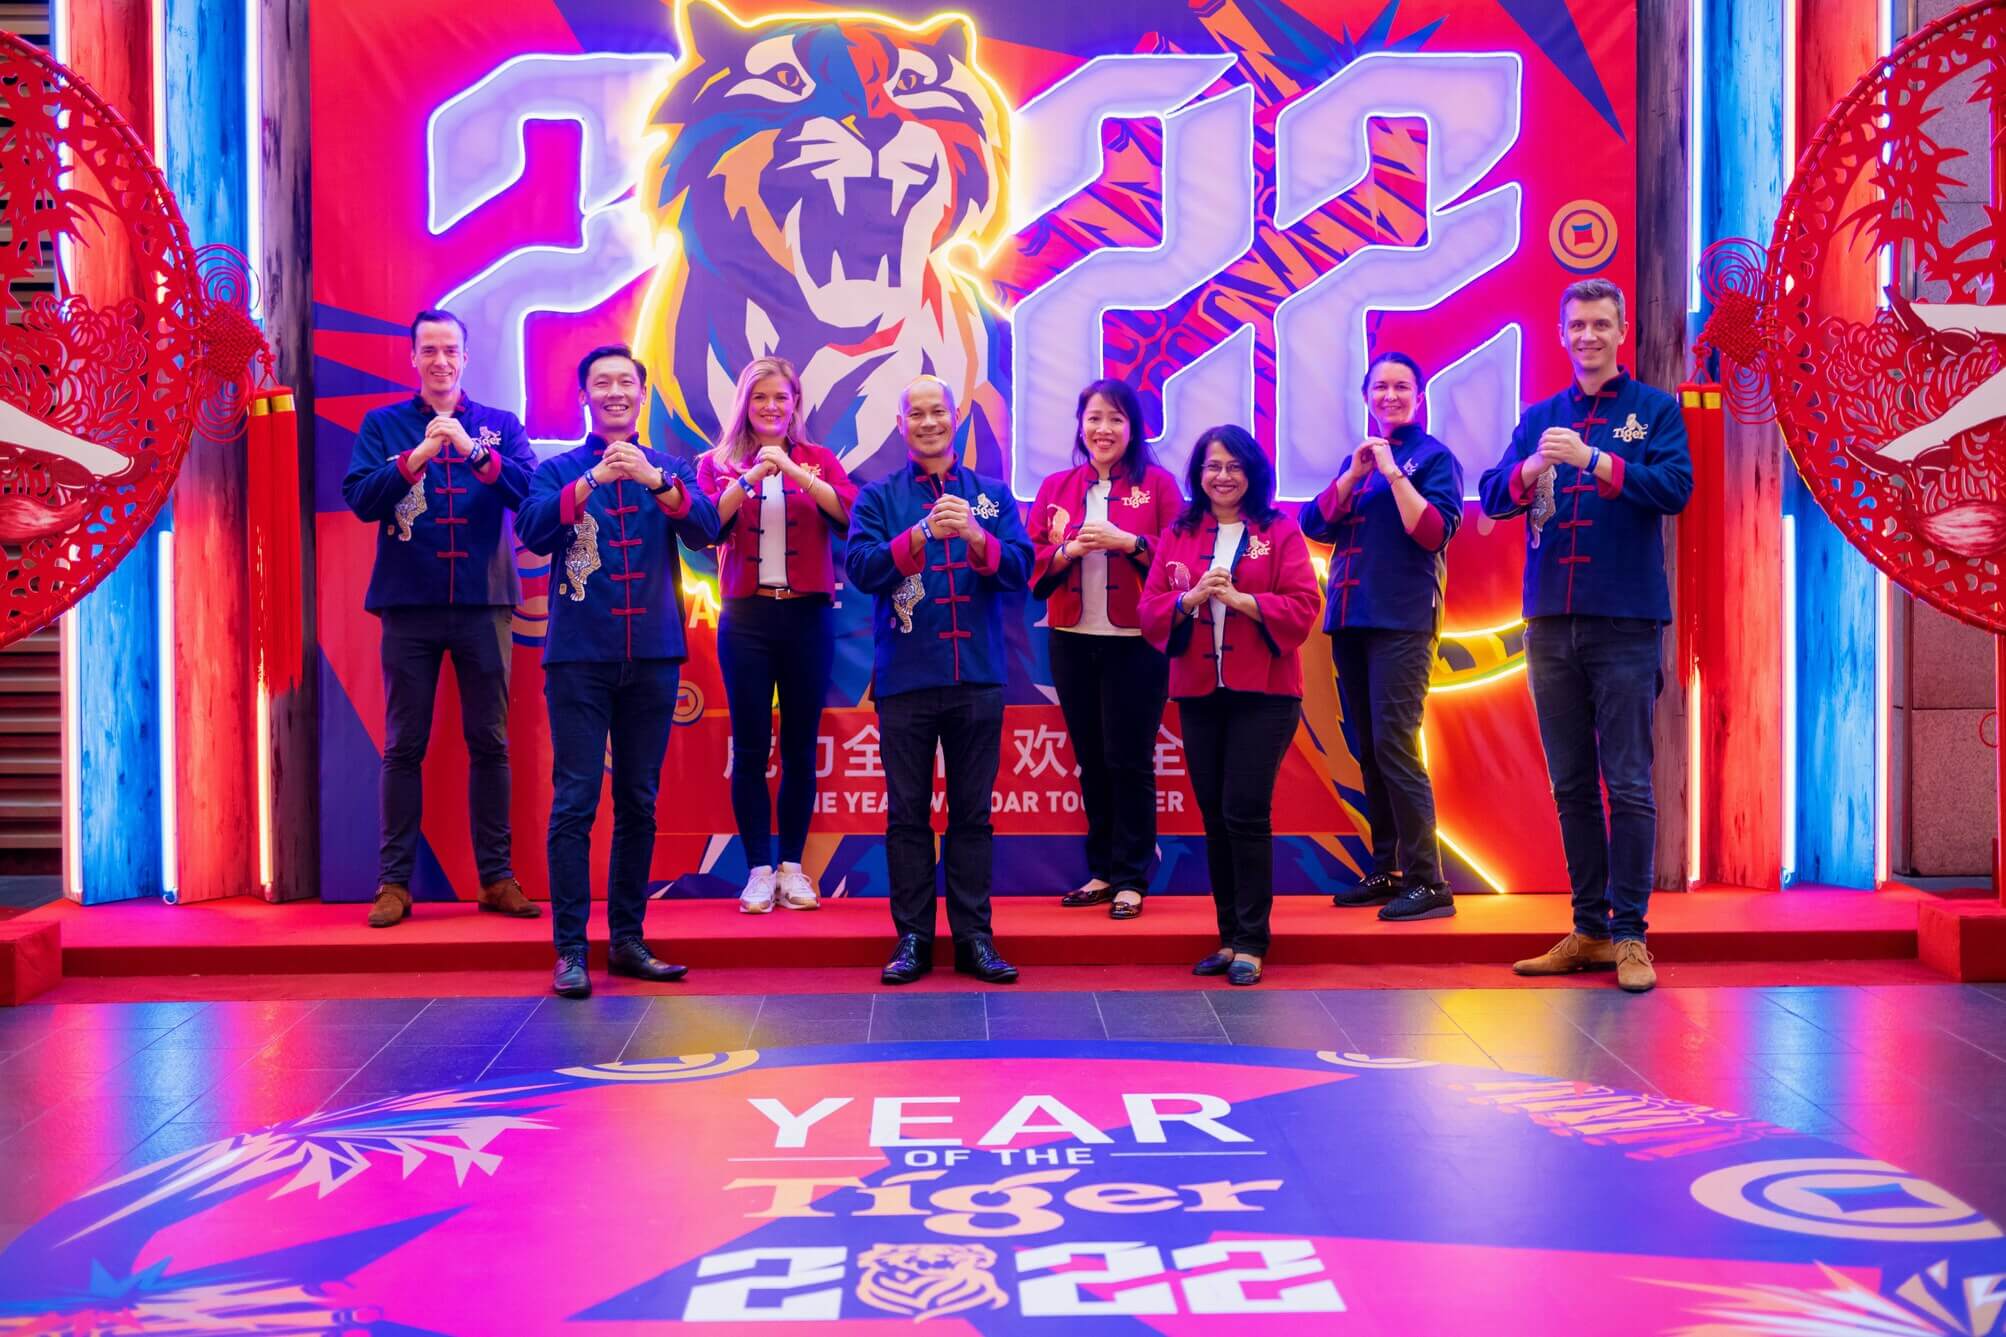 Management Team of HEINEKEN Malaysia at the media launch of Tiger CNY 2022 campaign - The Year We ROAR Together